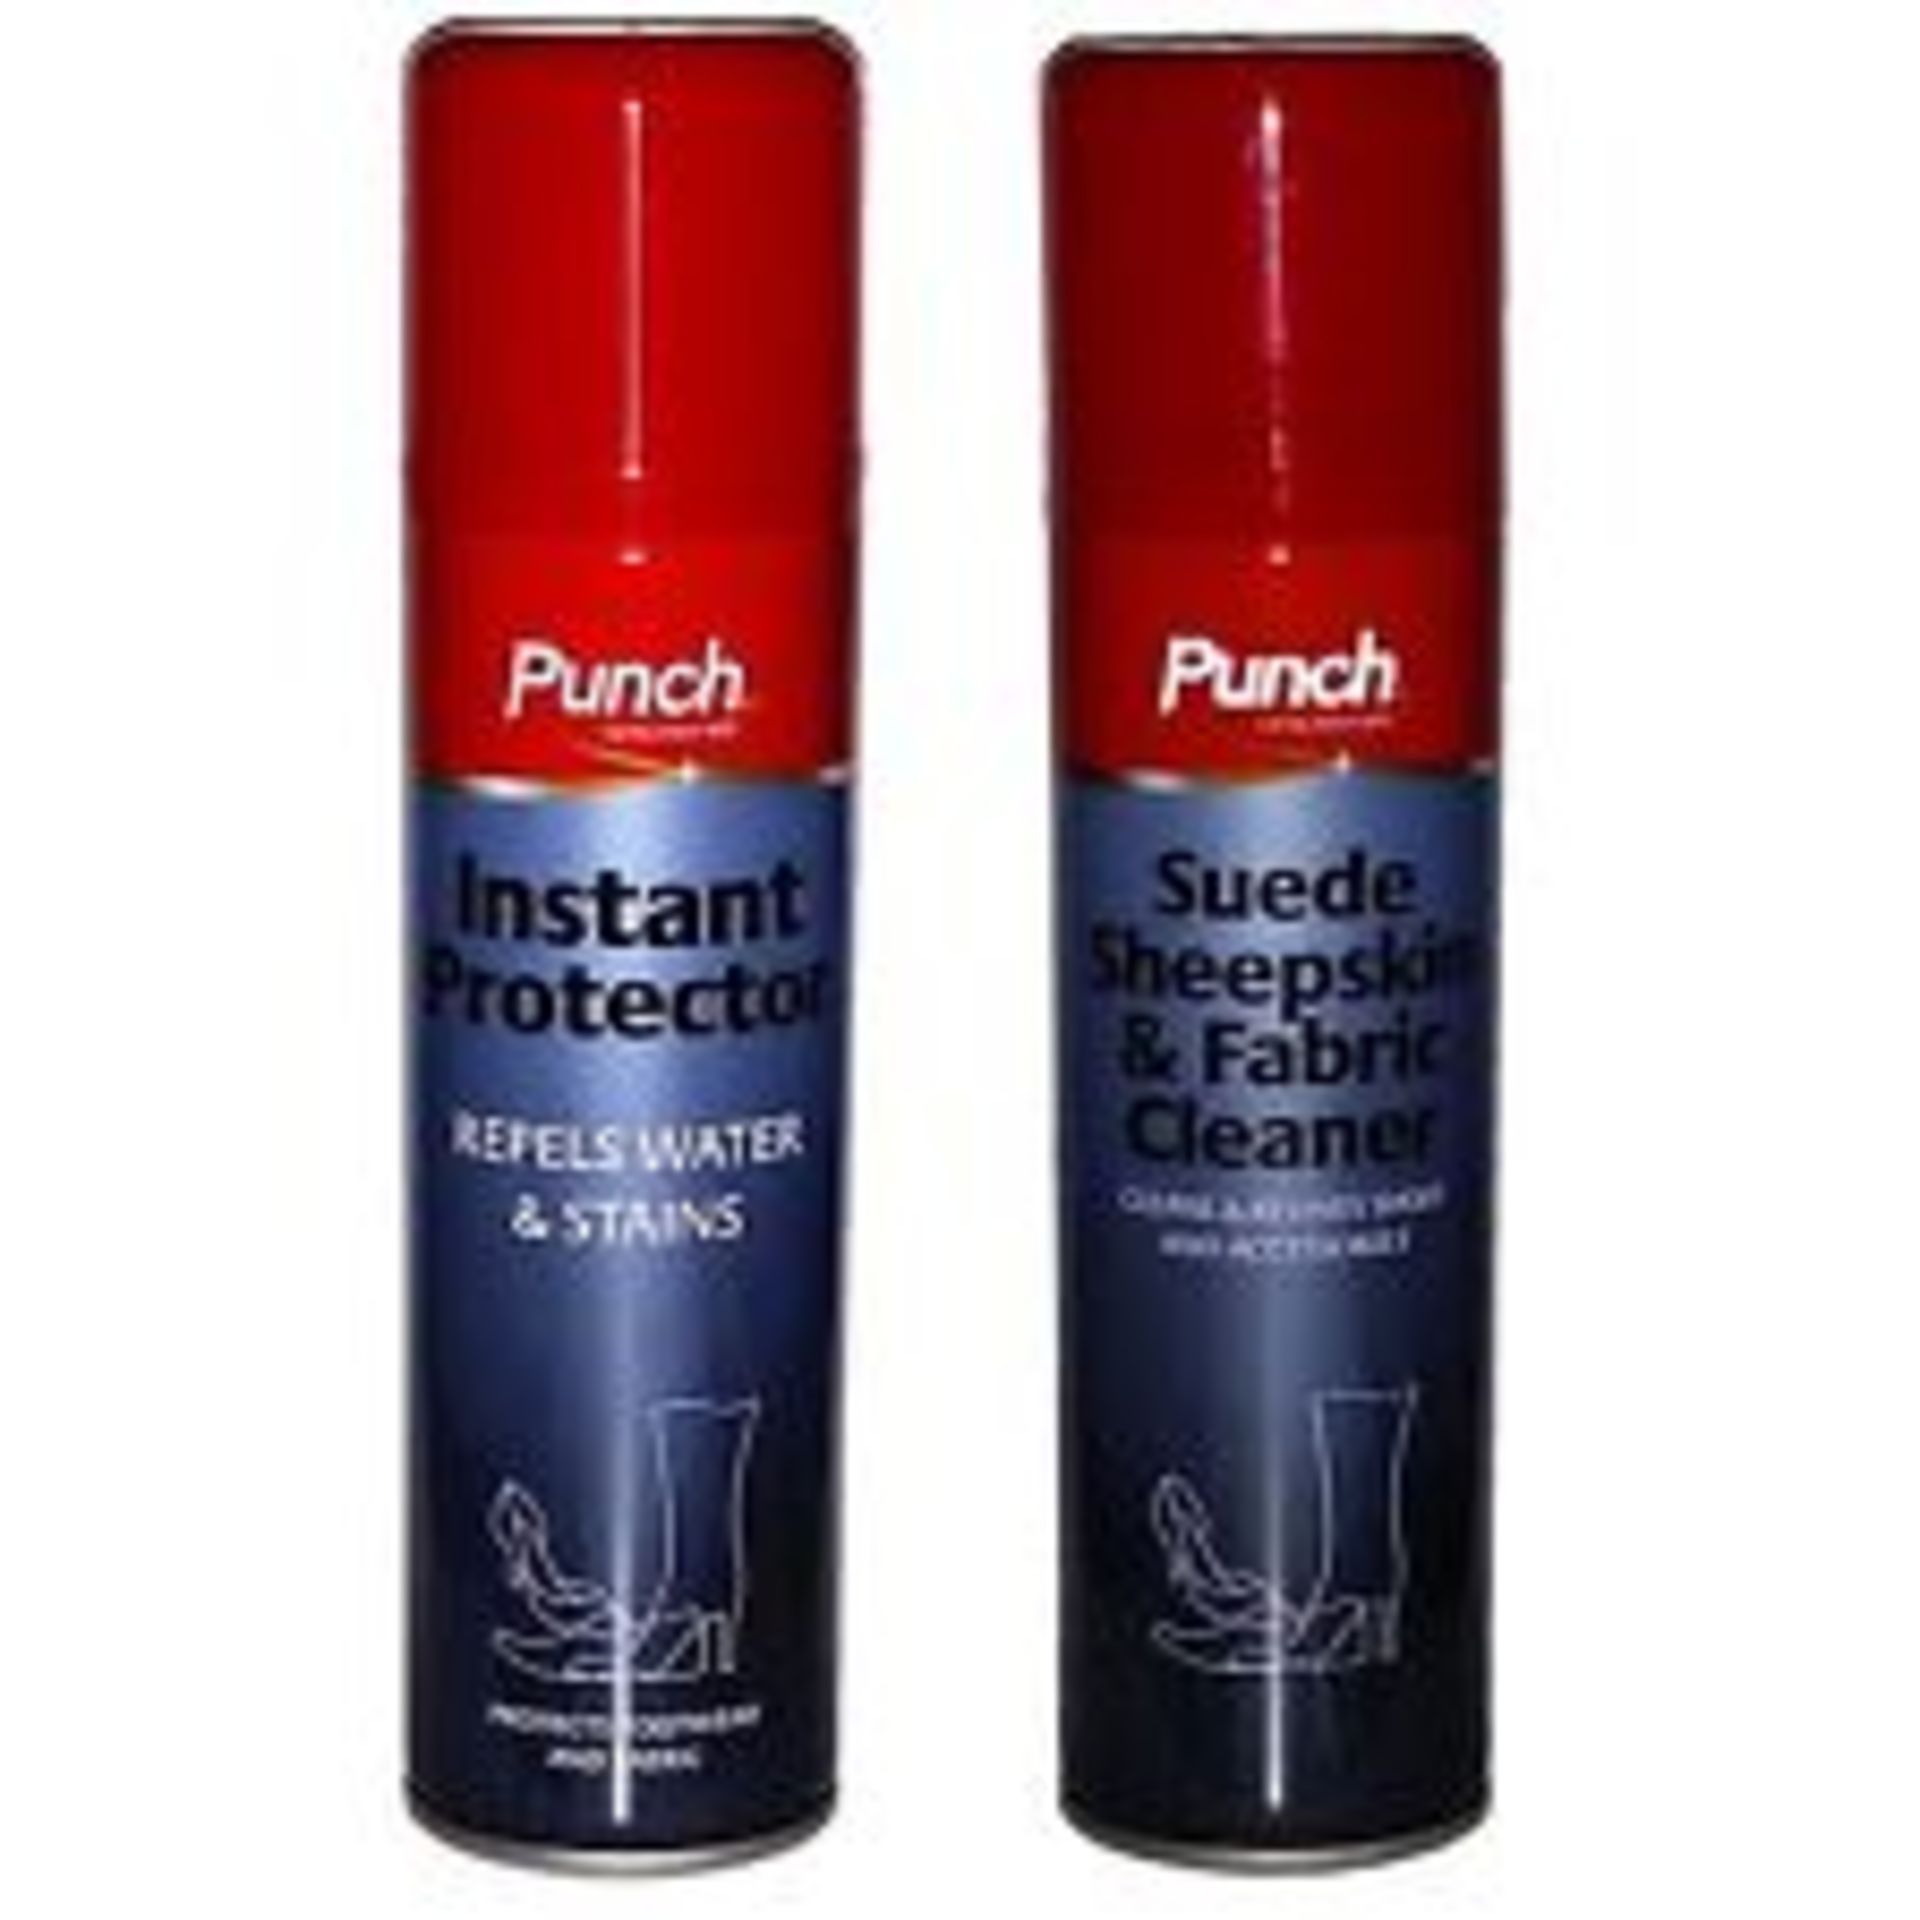 V *TRADE QTY* Brand New Job Lot of Six (6) 400ml Cans Punch Spray Protector For Shoes & Boots ISP £